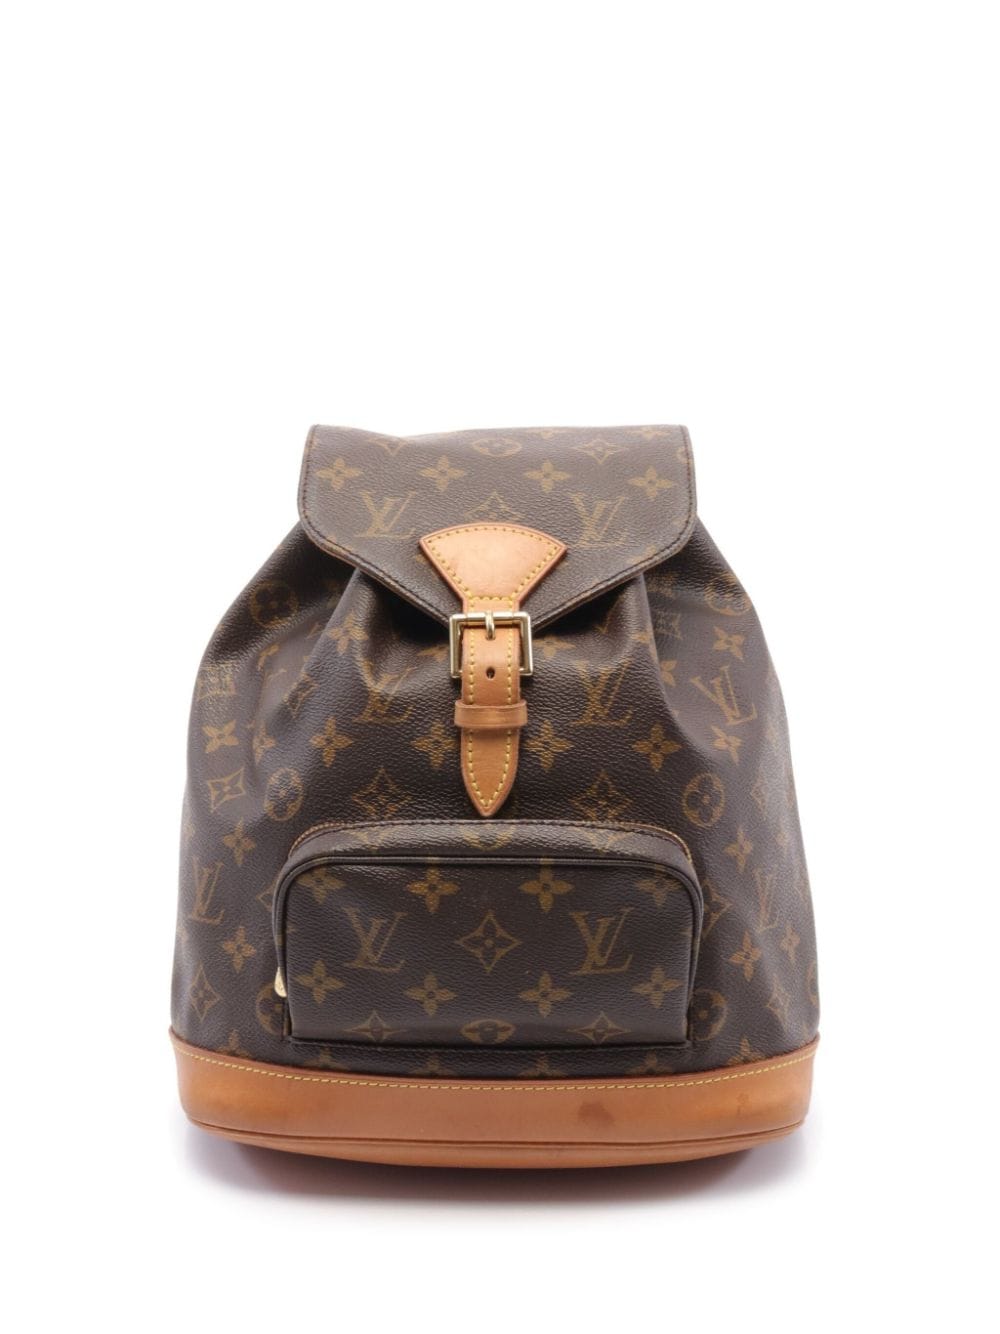 Louis Vuitton 1997 pre-owned Montsouris GM Backpack - Farfetch